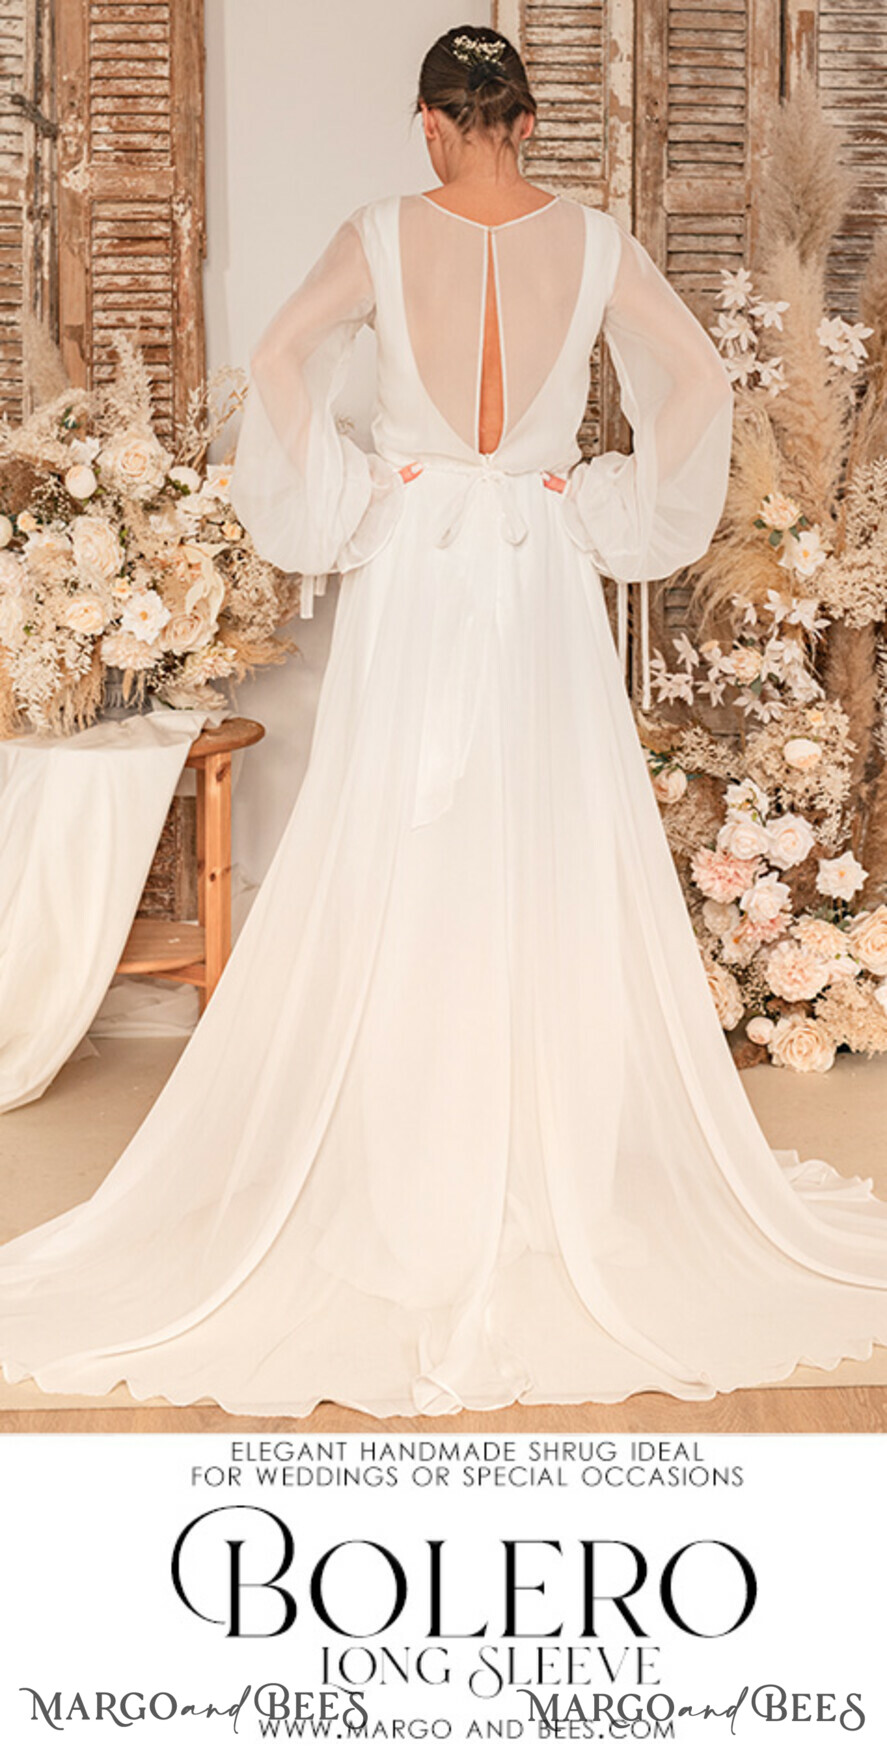 Bridal Blouses: The Classic Retro Puff Sleeves Are Back With An